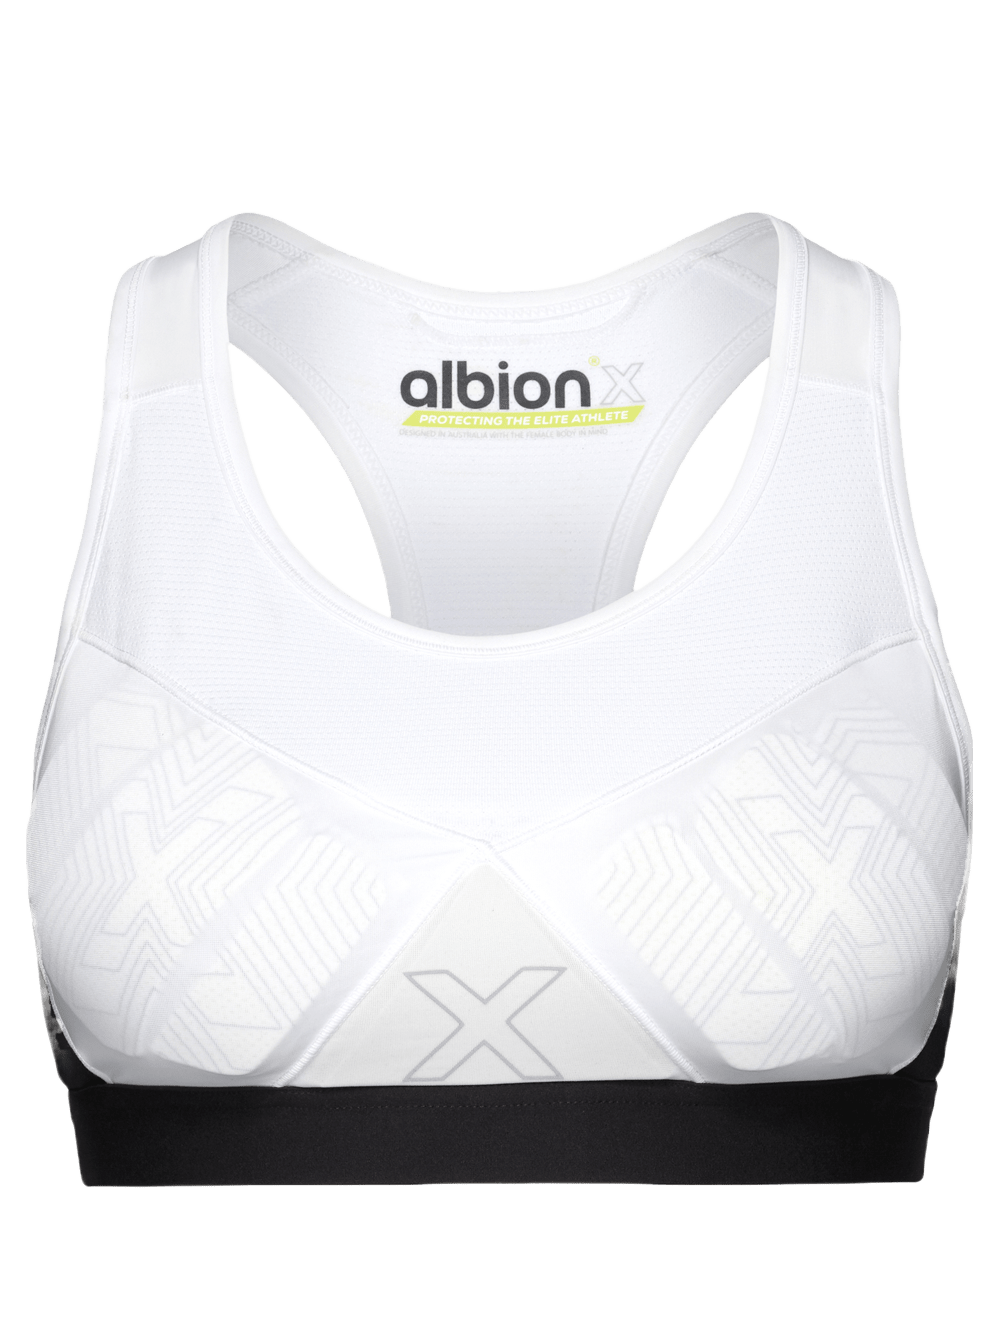 Girls Youth Cricket Impact Protection Bra